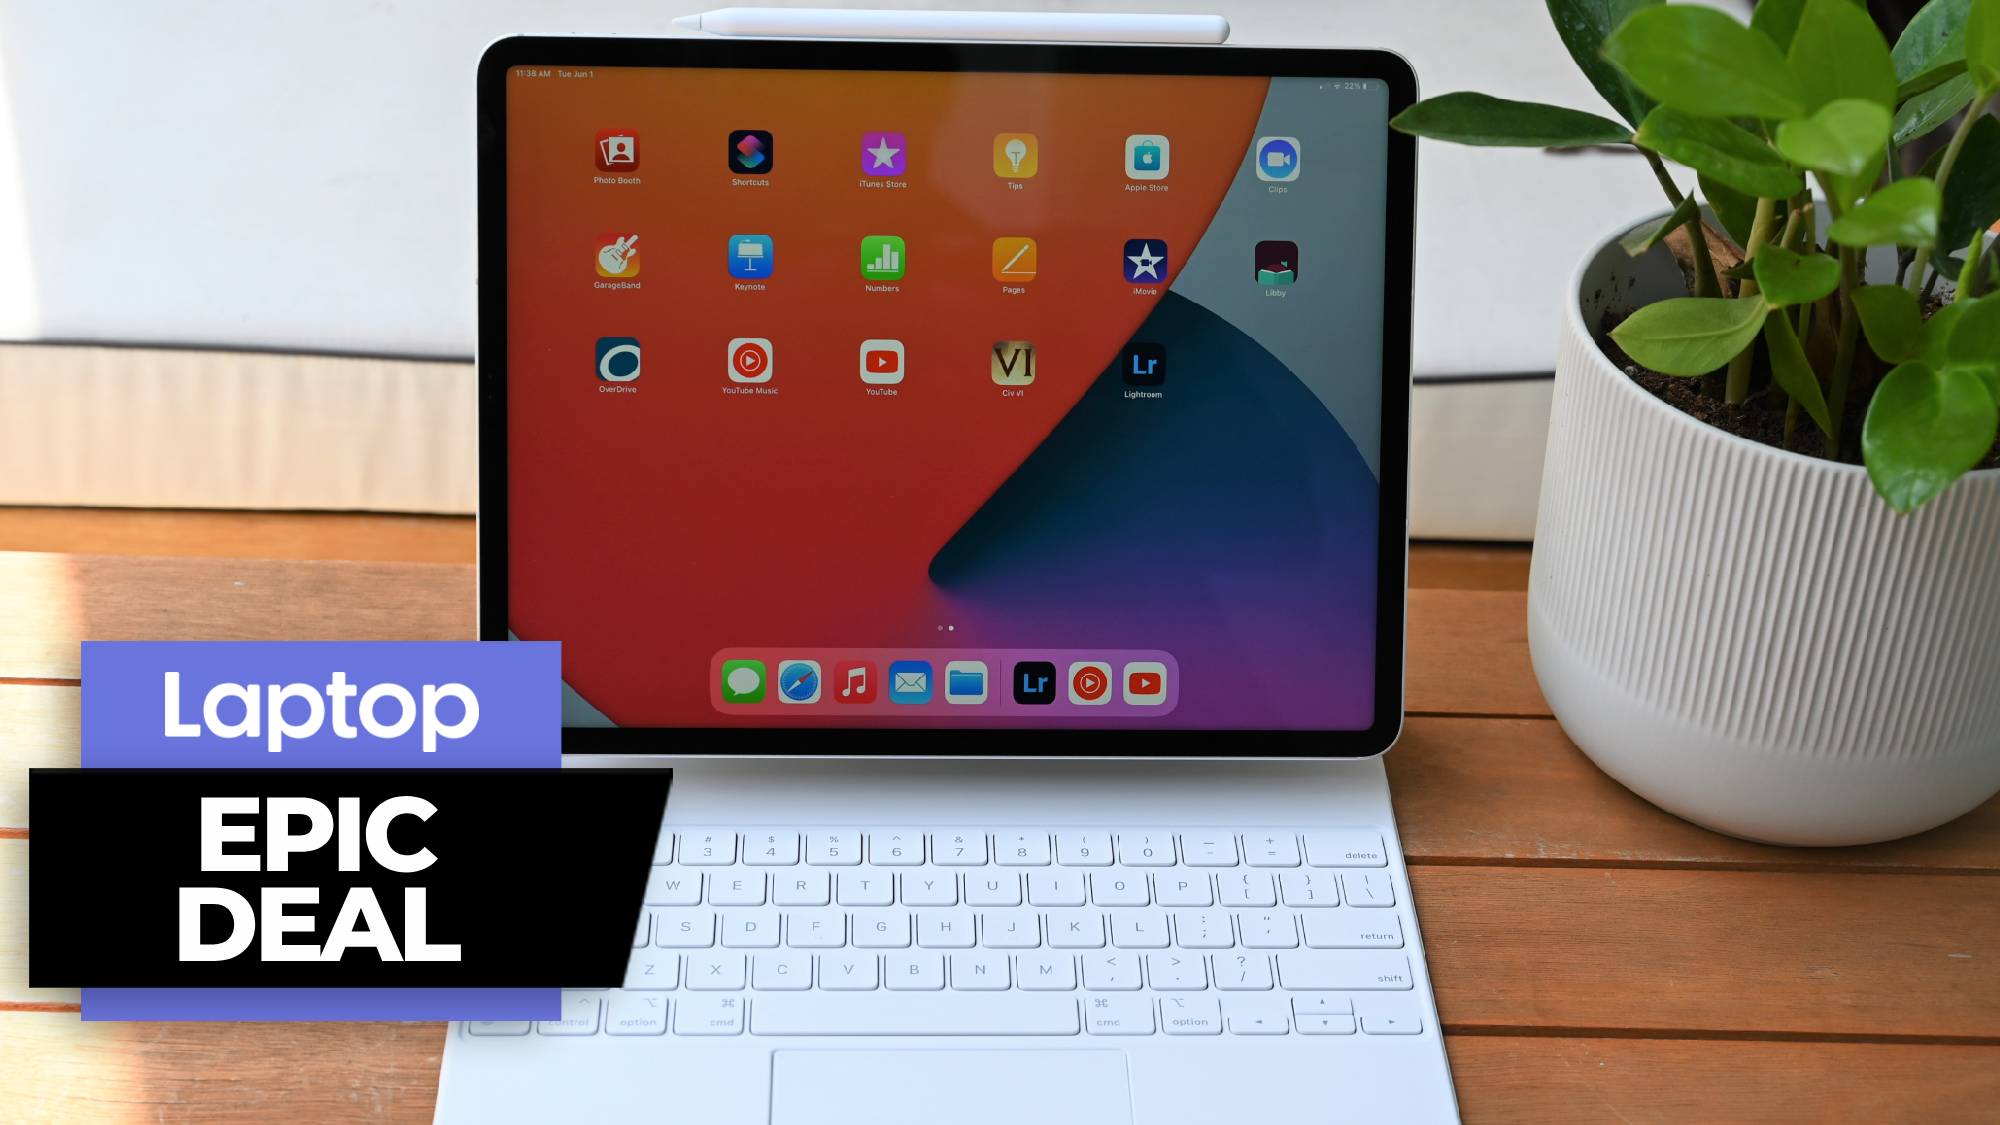 M1 iPad Pro 12.9 with Apple keyboard and Apple pencil on a wooden table next to a potted plant